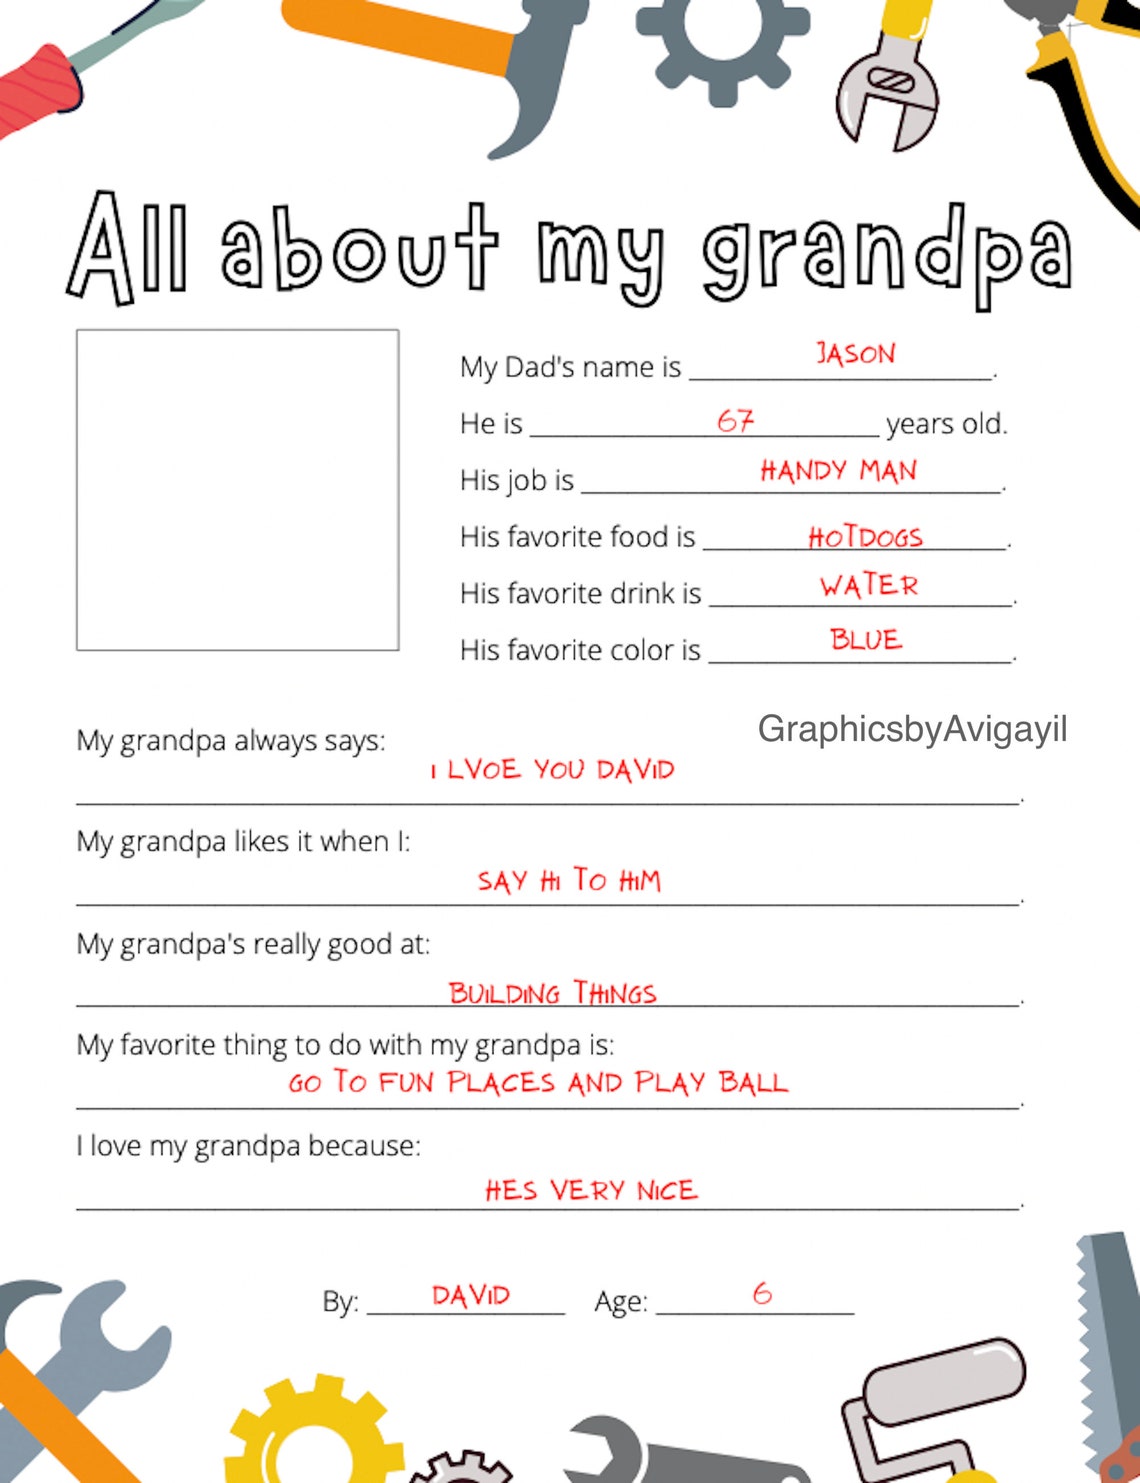 all-about-my-grandpa-coloring-sheet-card-for-grandpa-kids-etsy